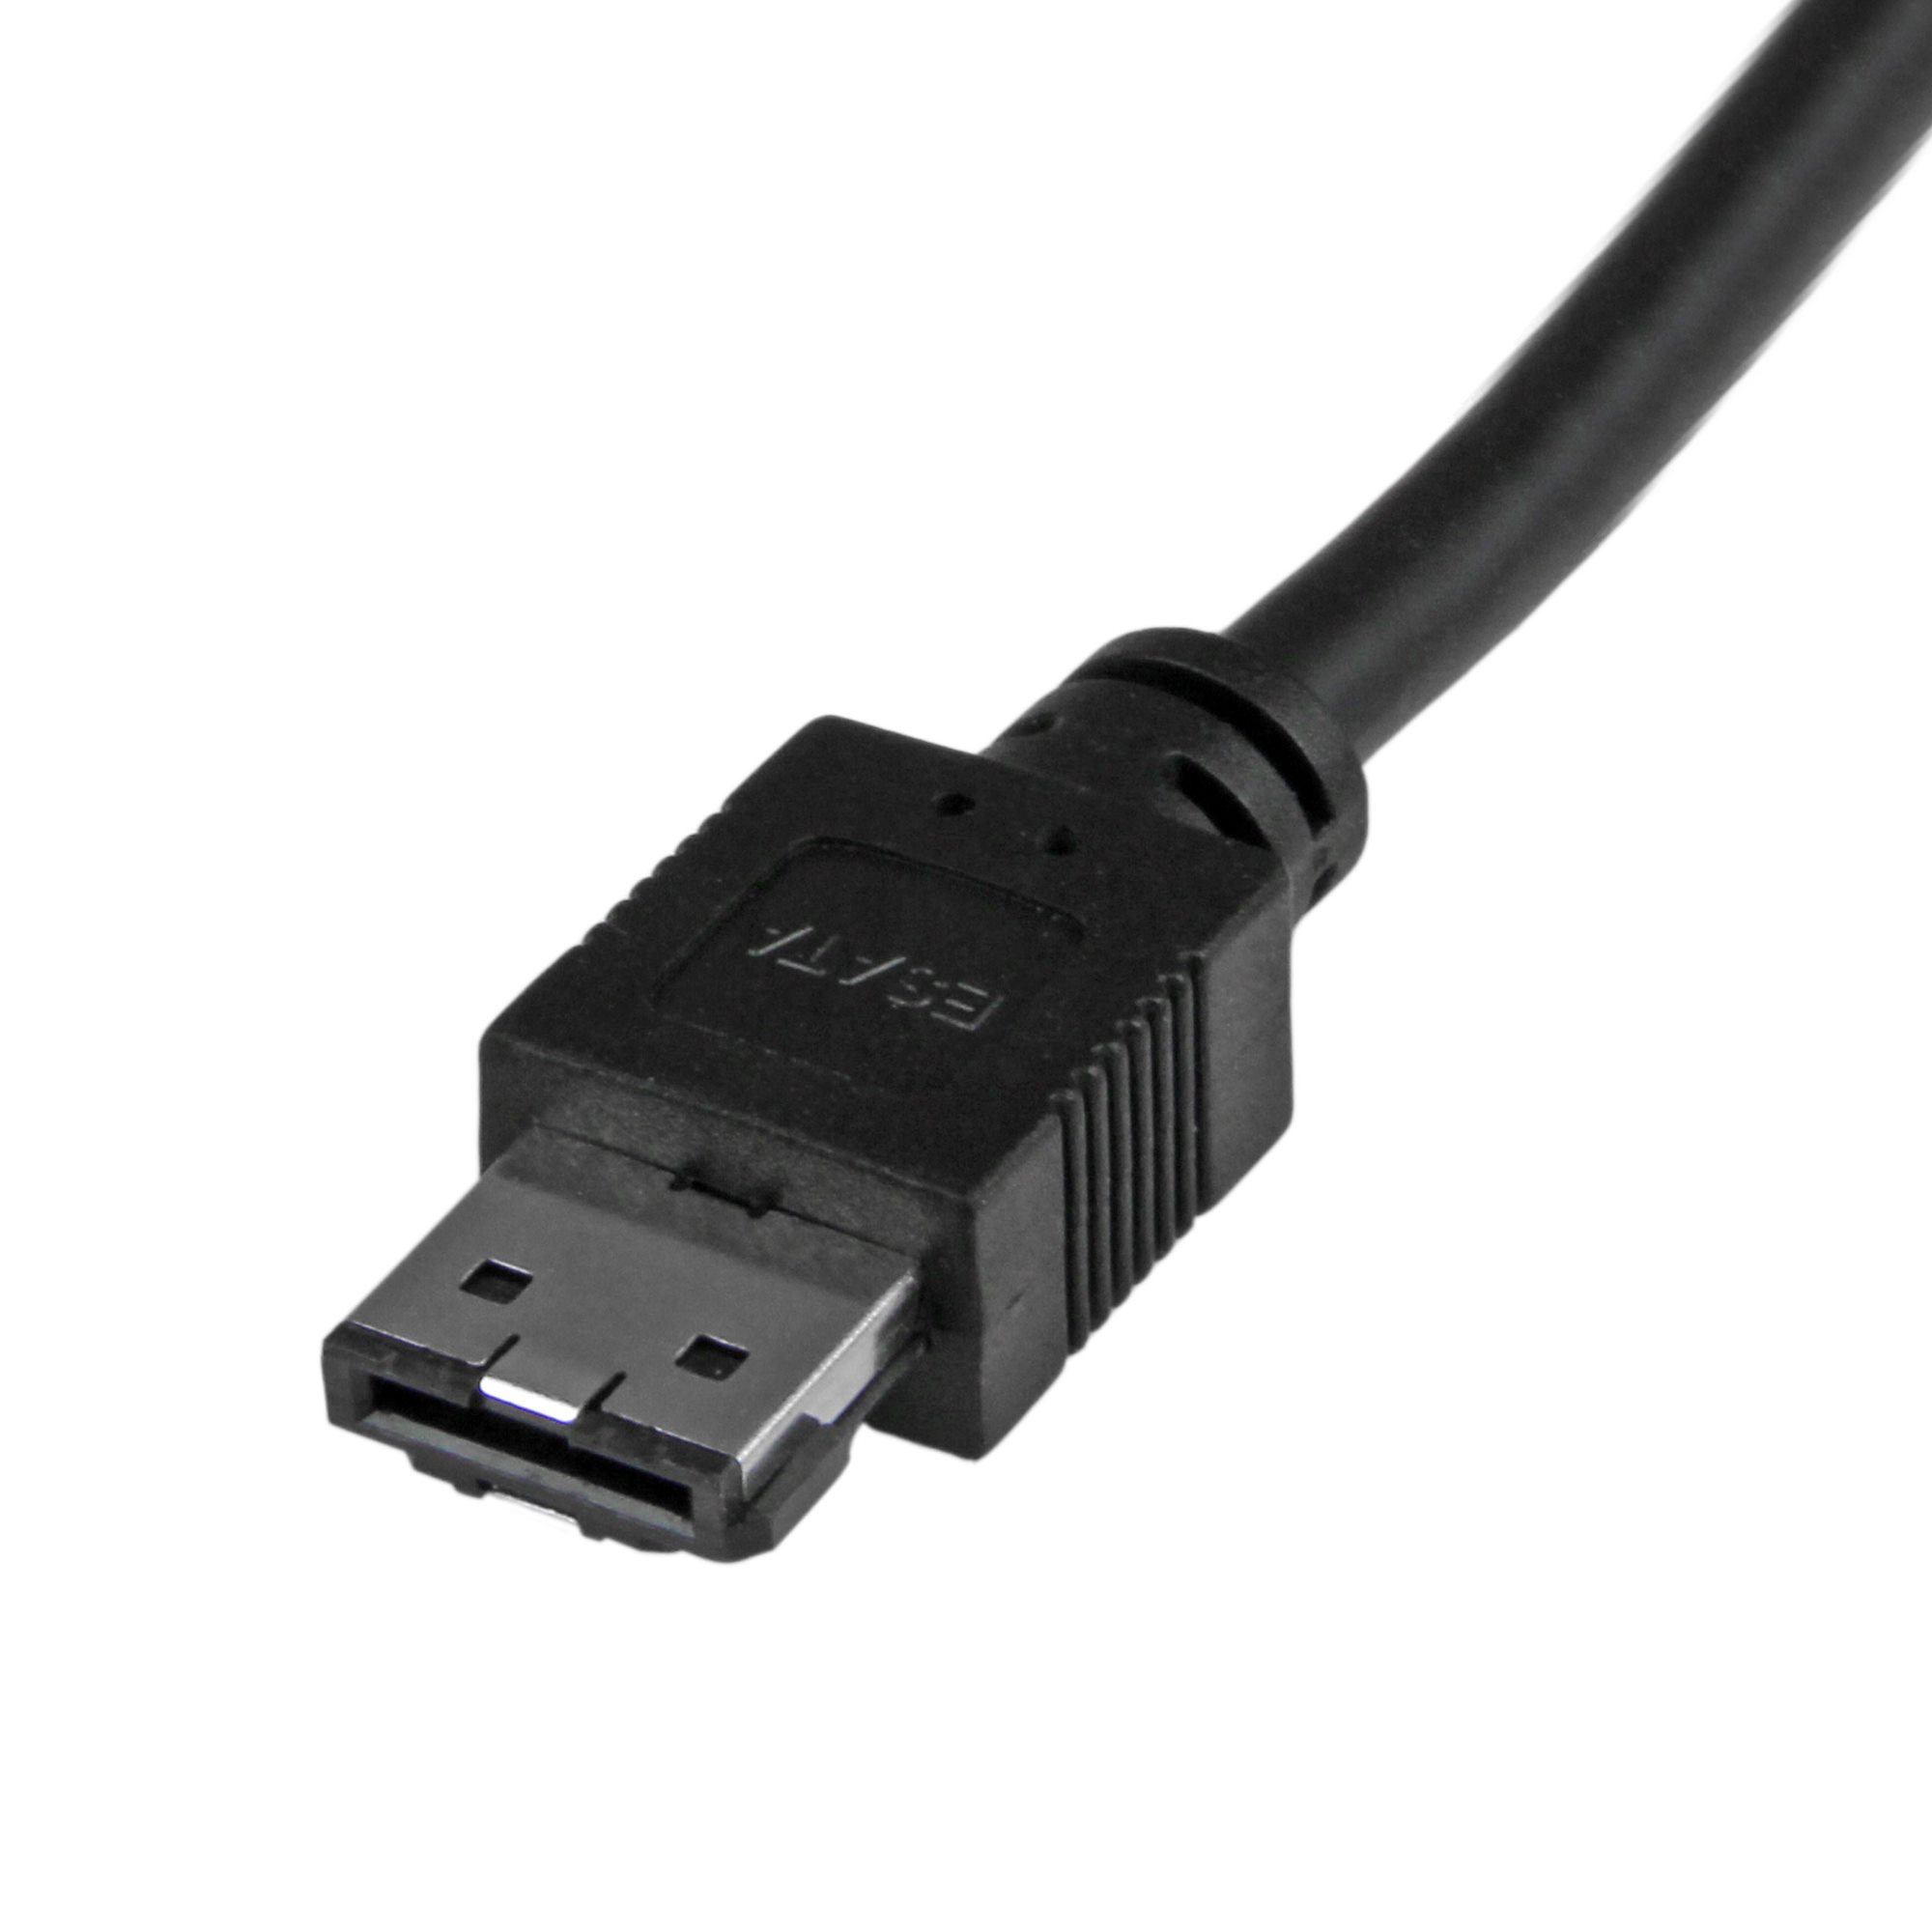 USB 3.0 to HDD/SSD/ODD 3ft Cable Drive Adapters and Drive Converters | StarTech.com